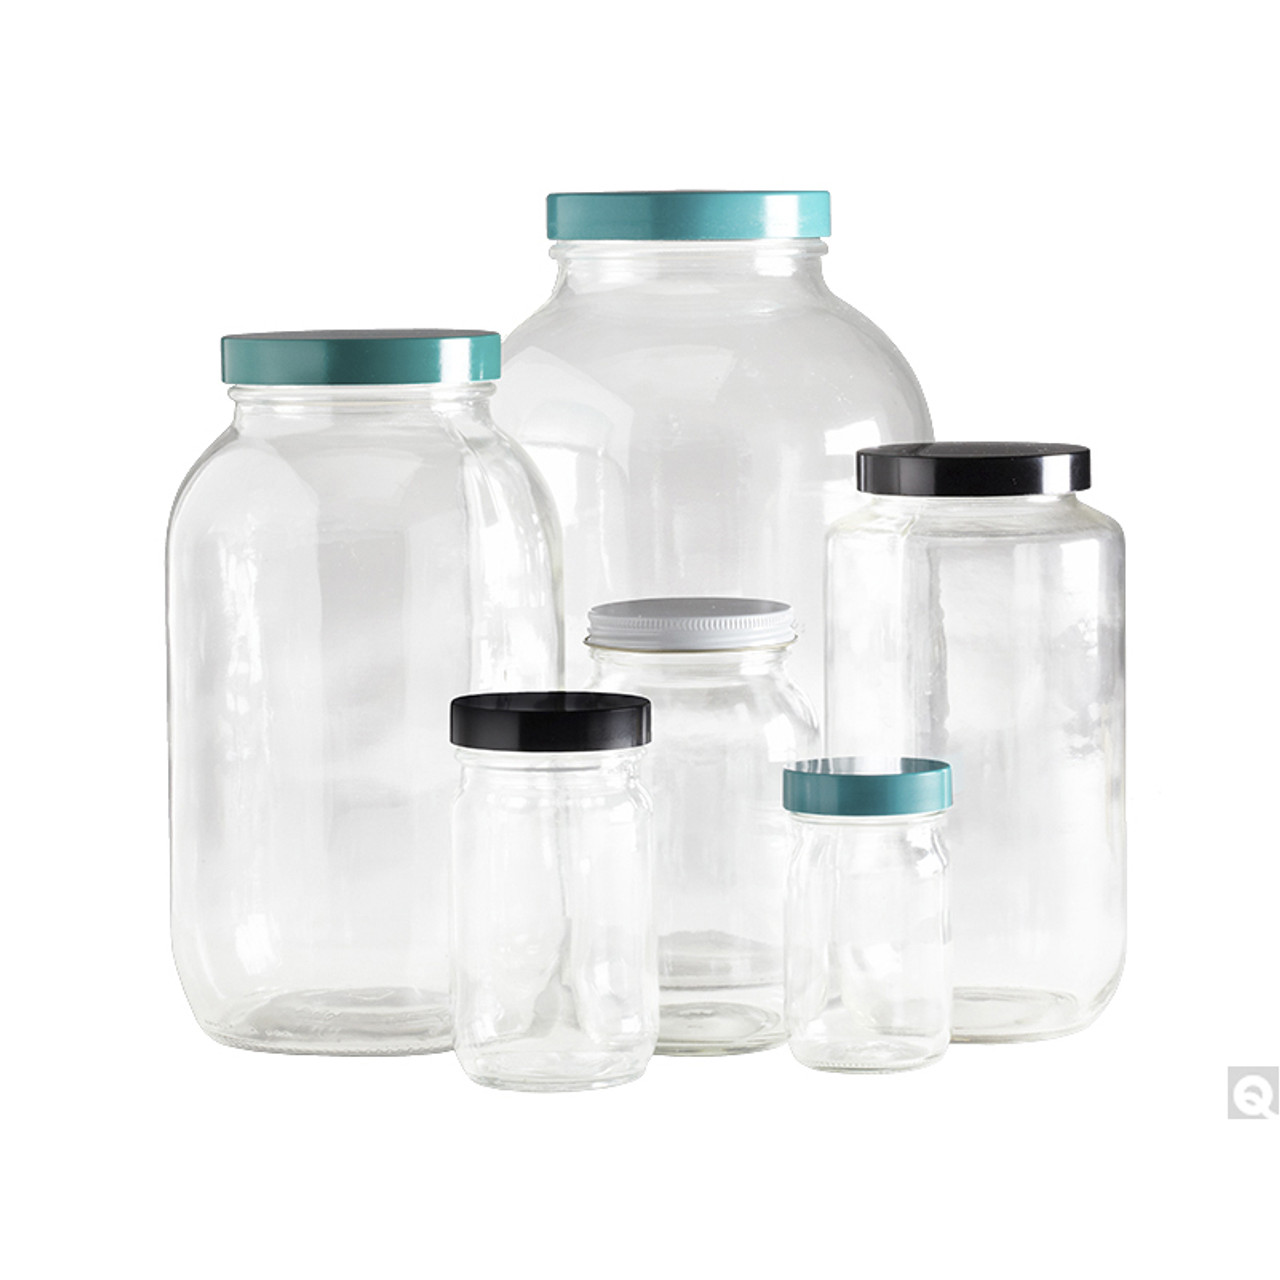 Buy 8oz Plastic Wide-Mouth Storage Jars (12 pack) - Large straight